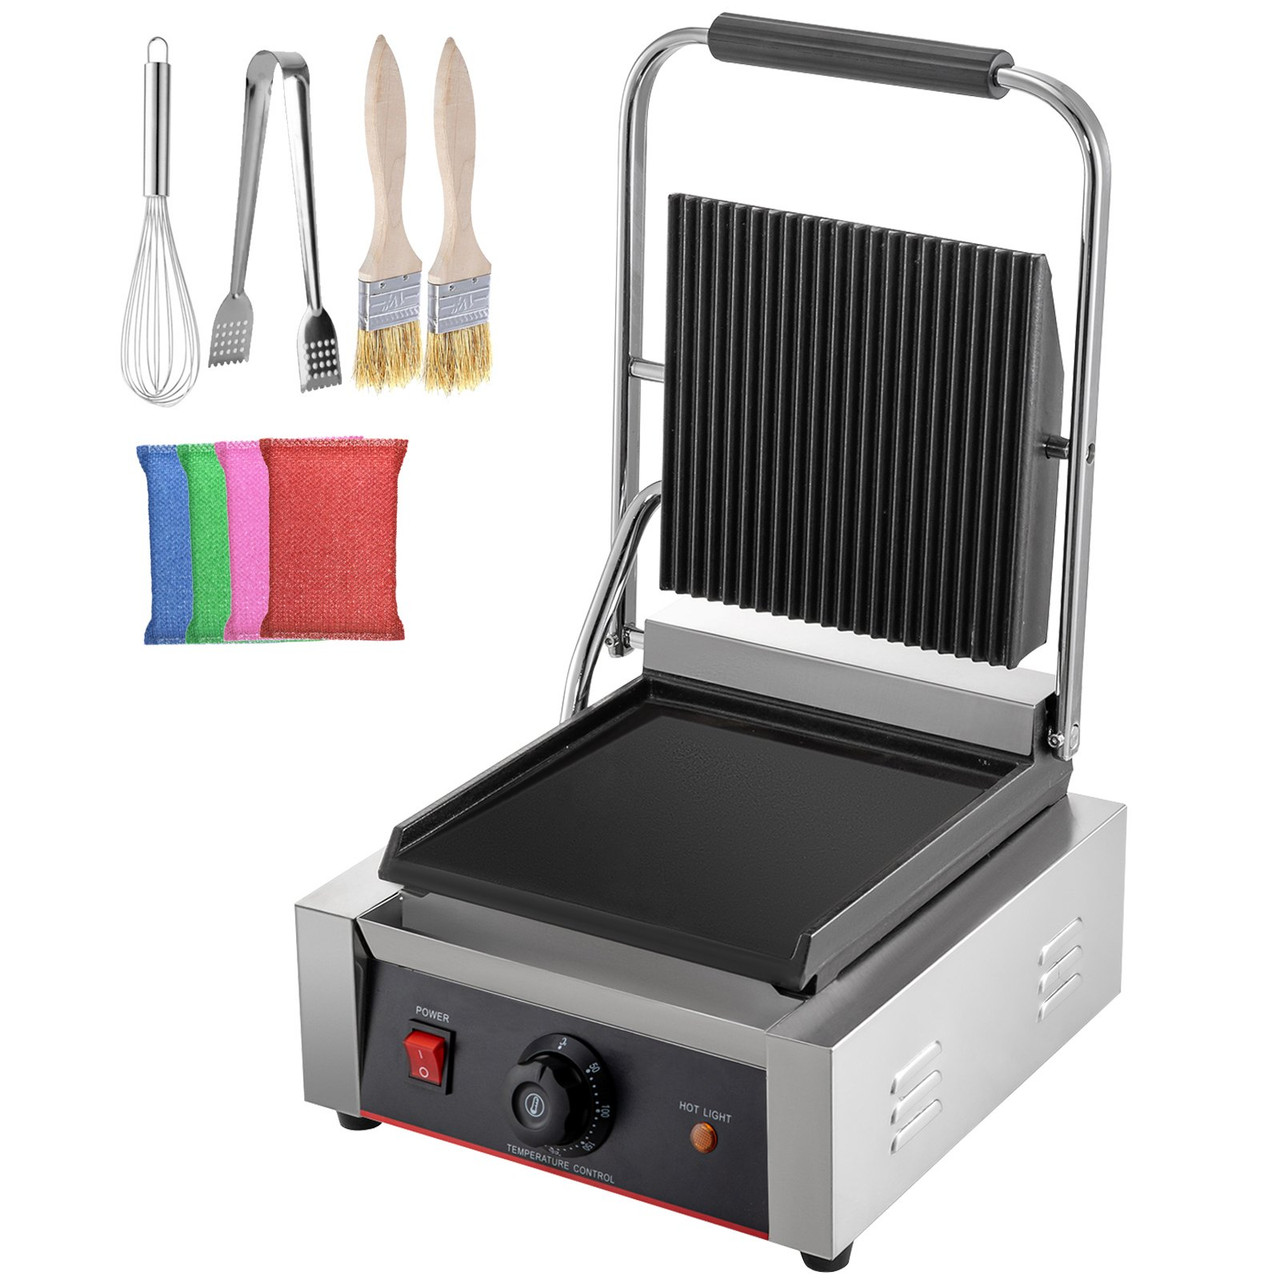 Commercial Sandwich Panini Press Grill,110V 1800W Up Grooved and Down Flat Plates Electric Sandwich Maker, Temperature Control 122øF-572øF for Hamburgers Steaks Bacons